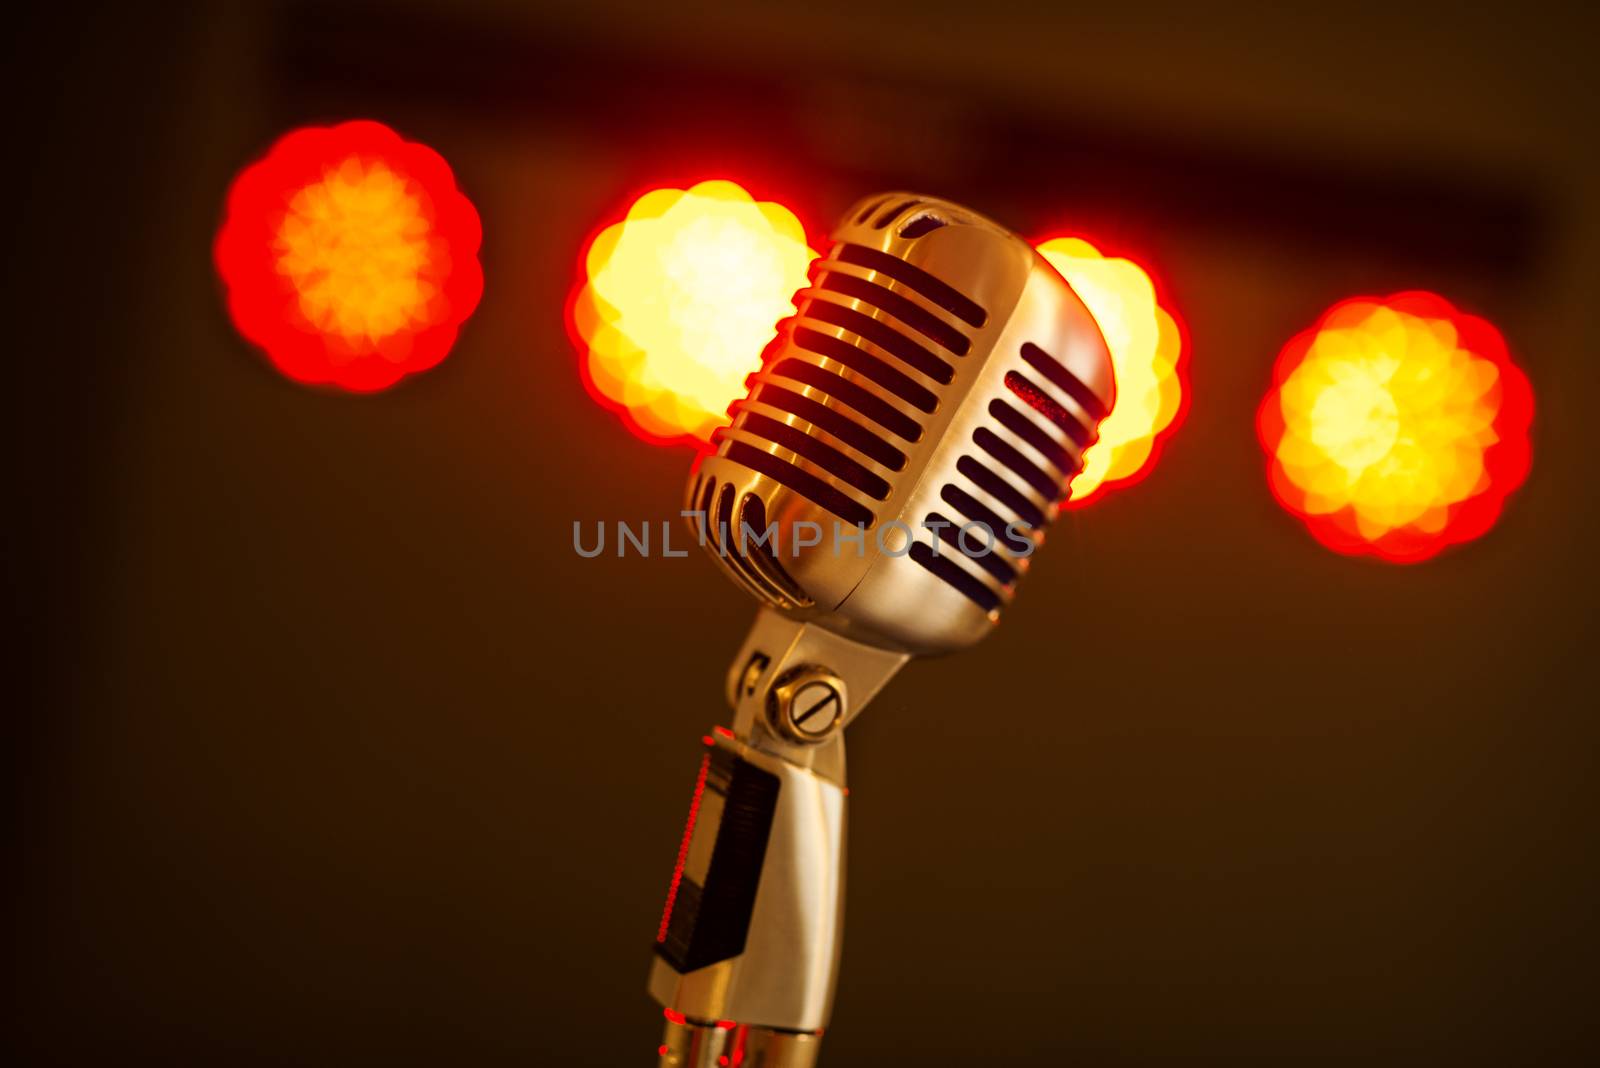 Close-up of a vintage silver microphone on stage light background.